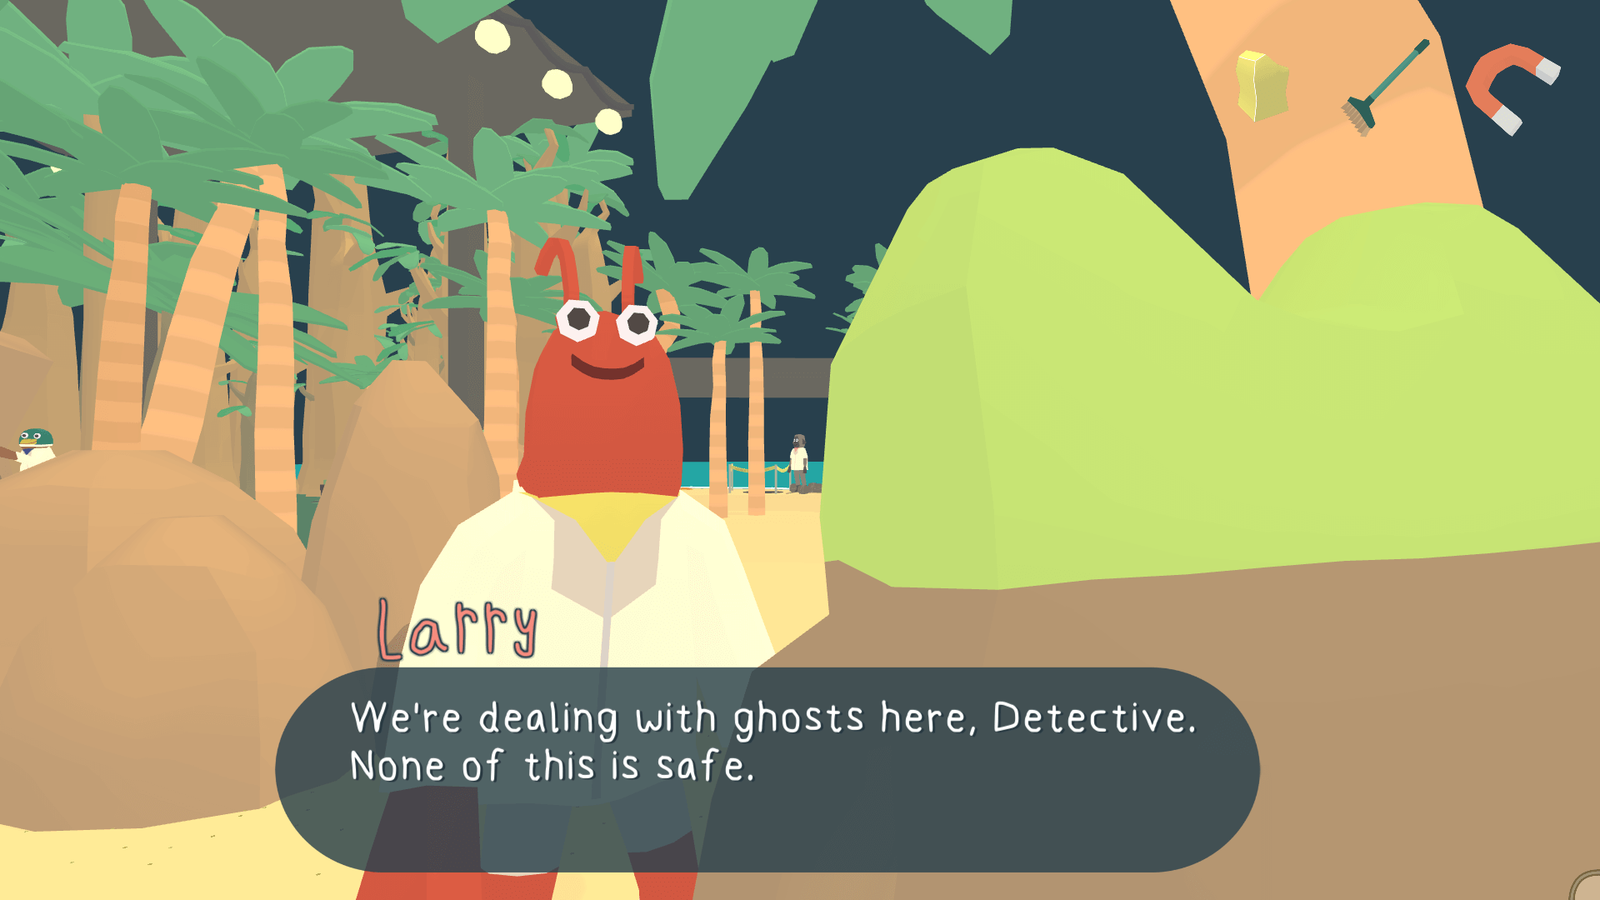 The Haunted Island, a Frog Detective Game